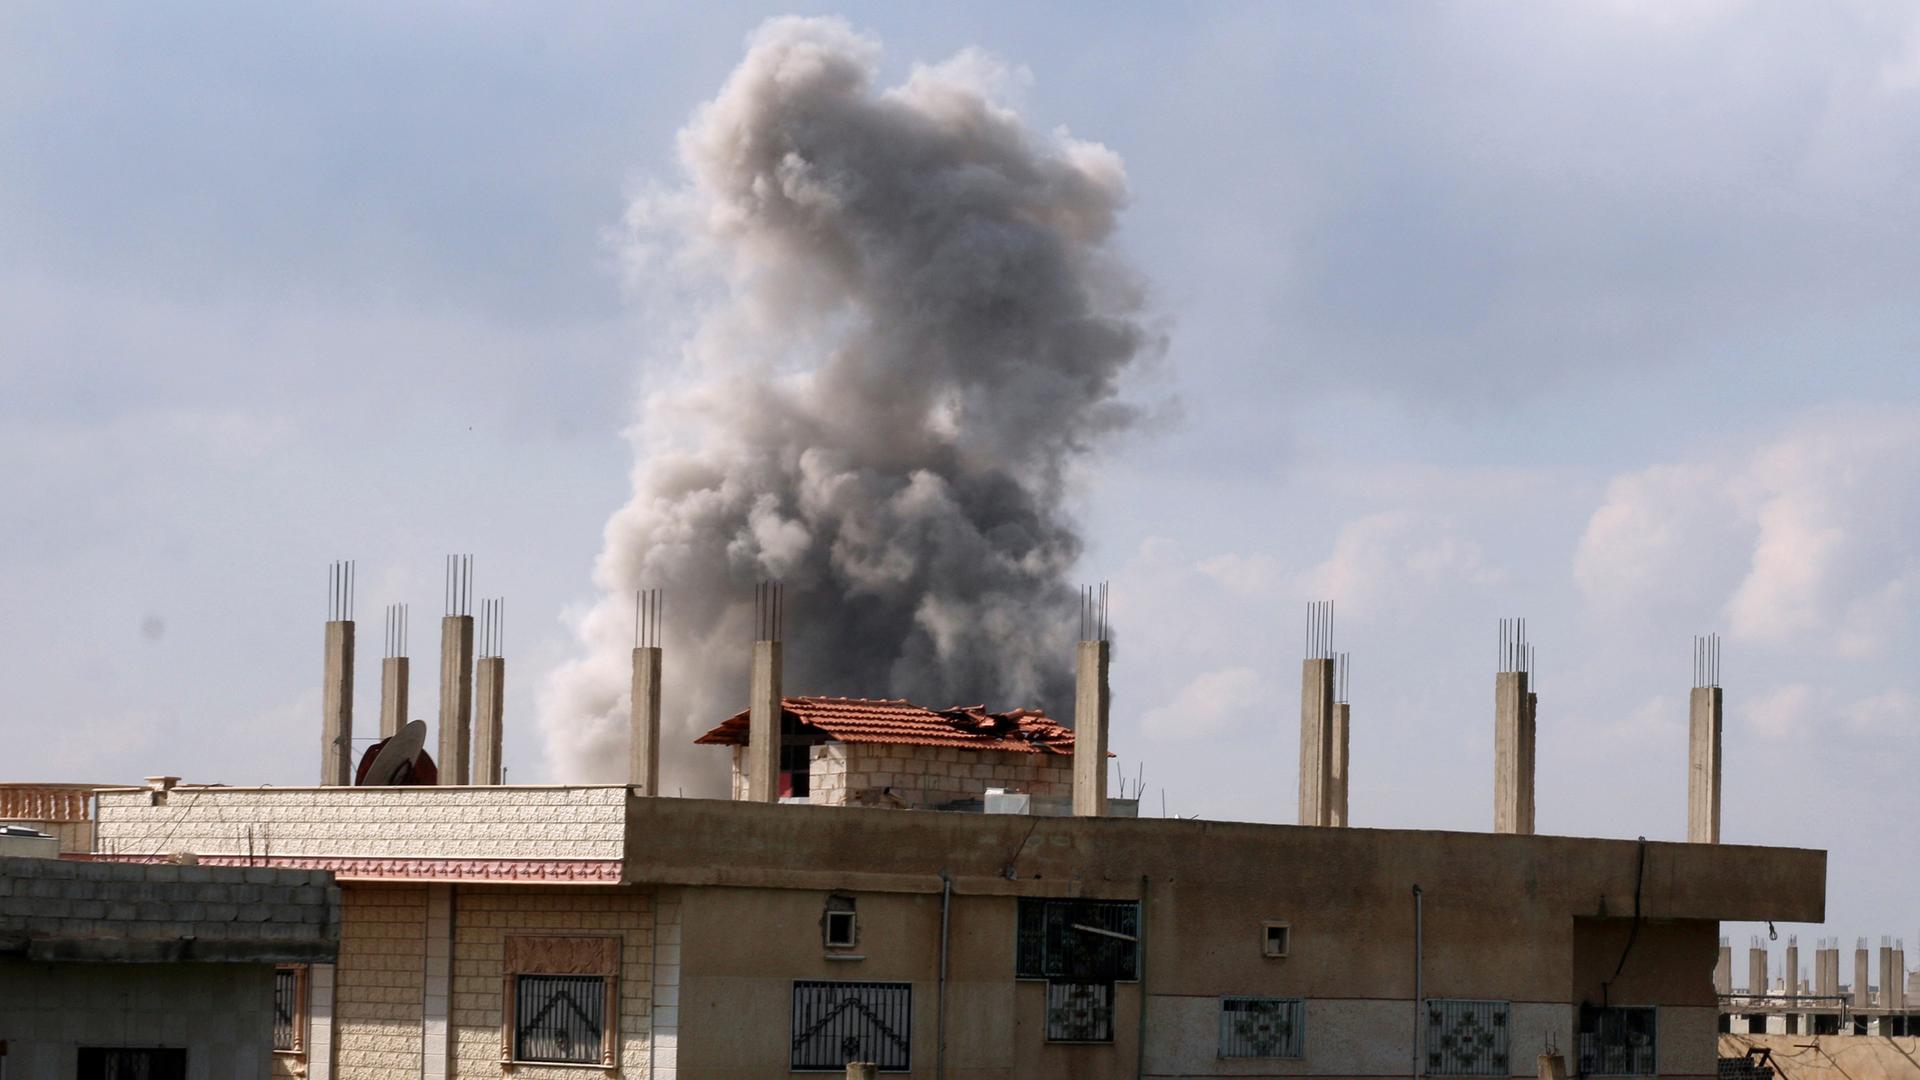 Smoke rises after an airstrike on a rebel-held area, April 7th 2017